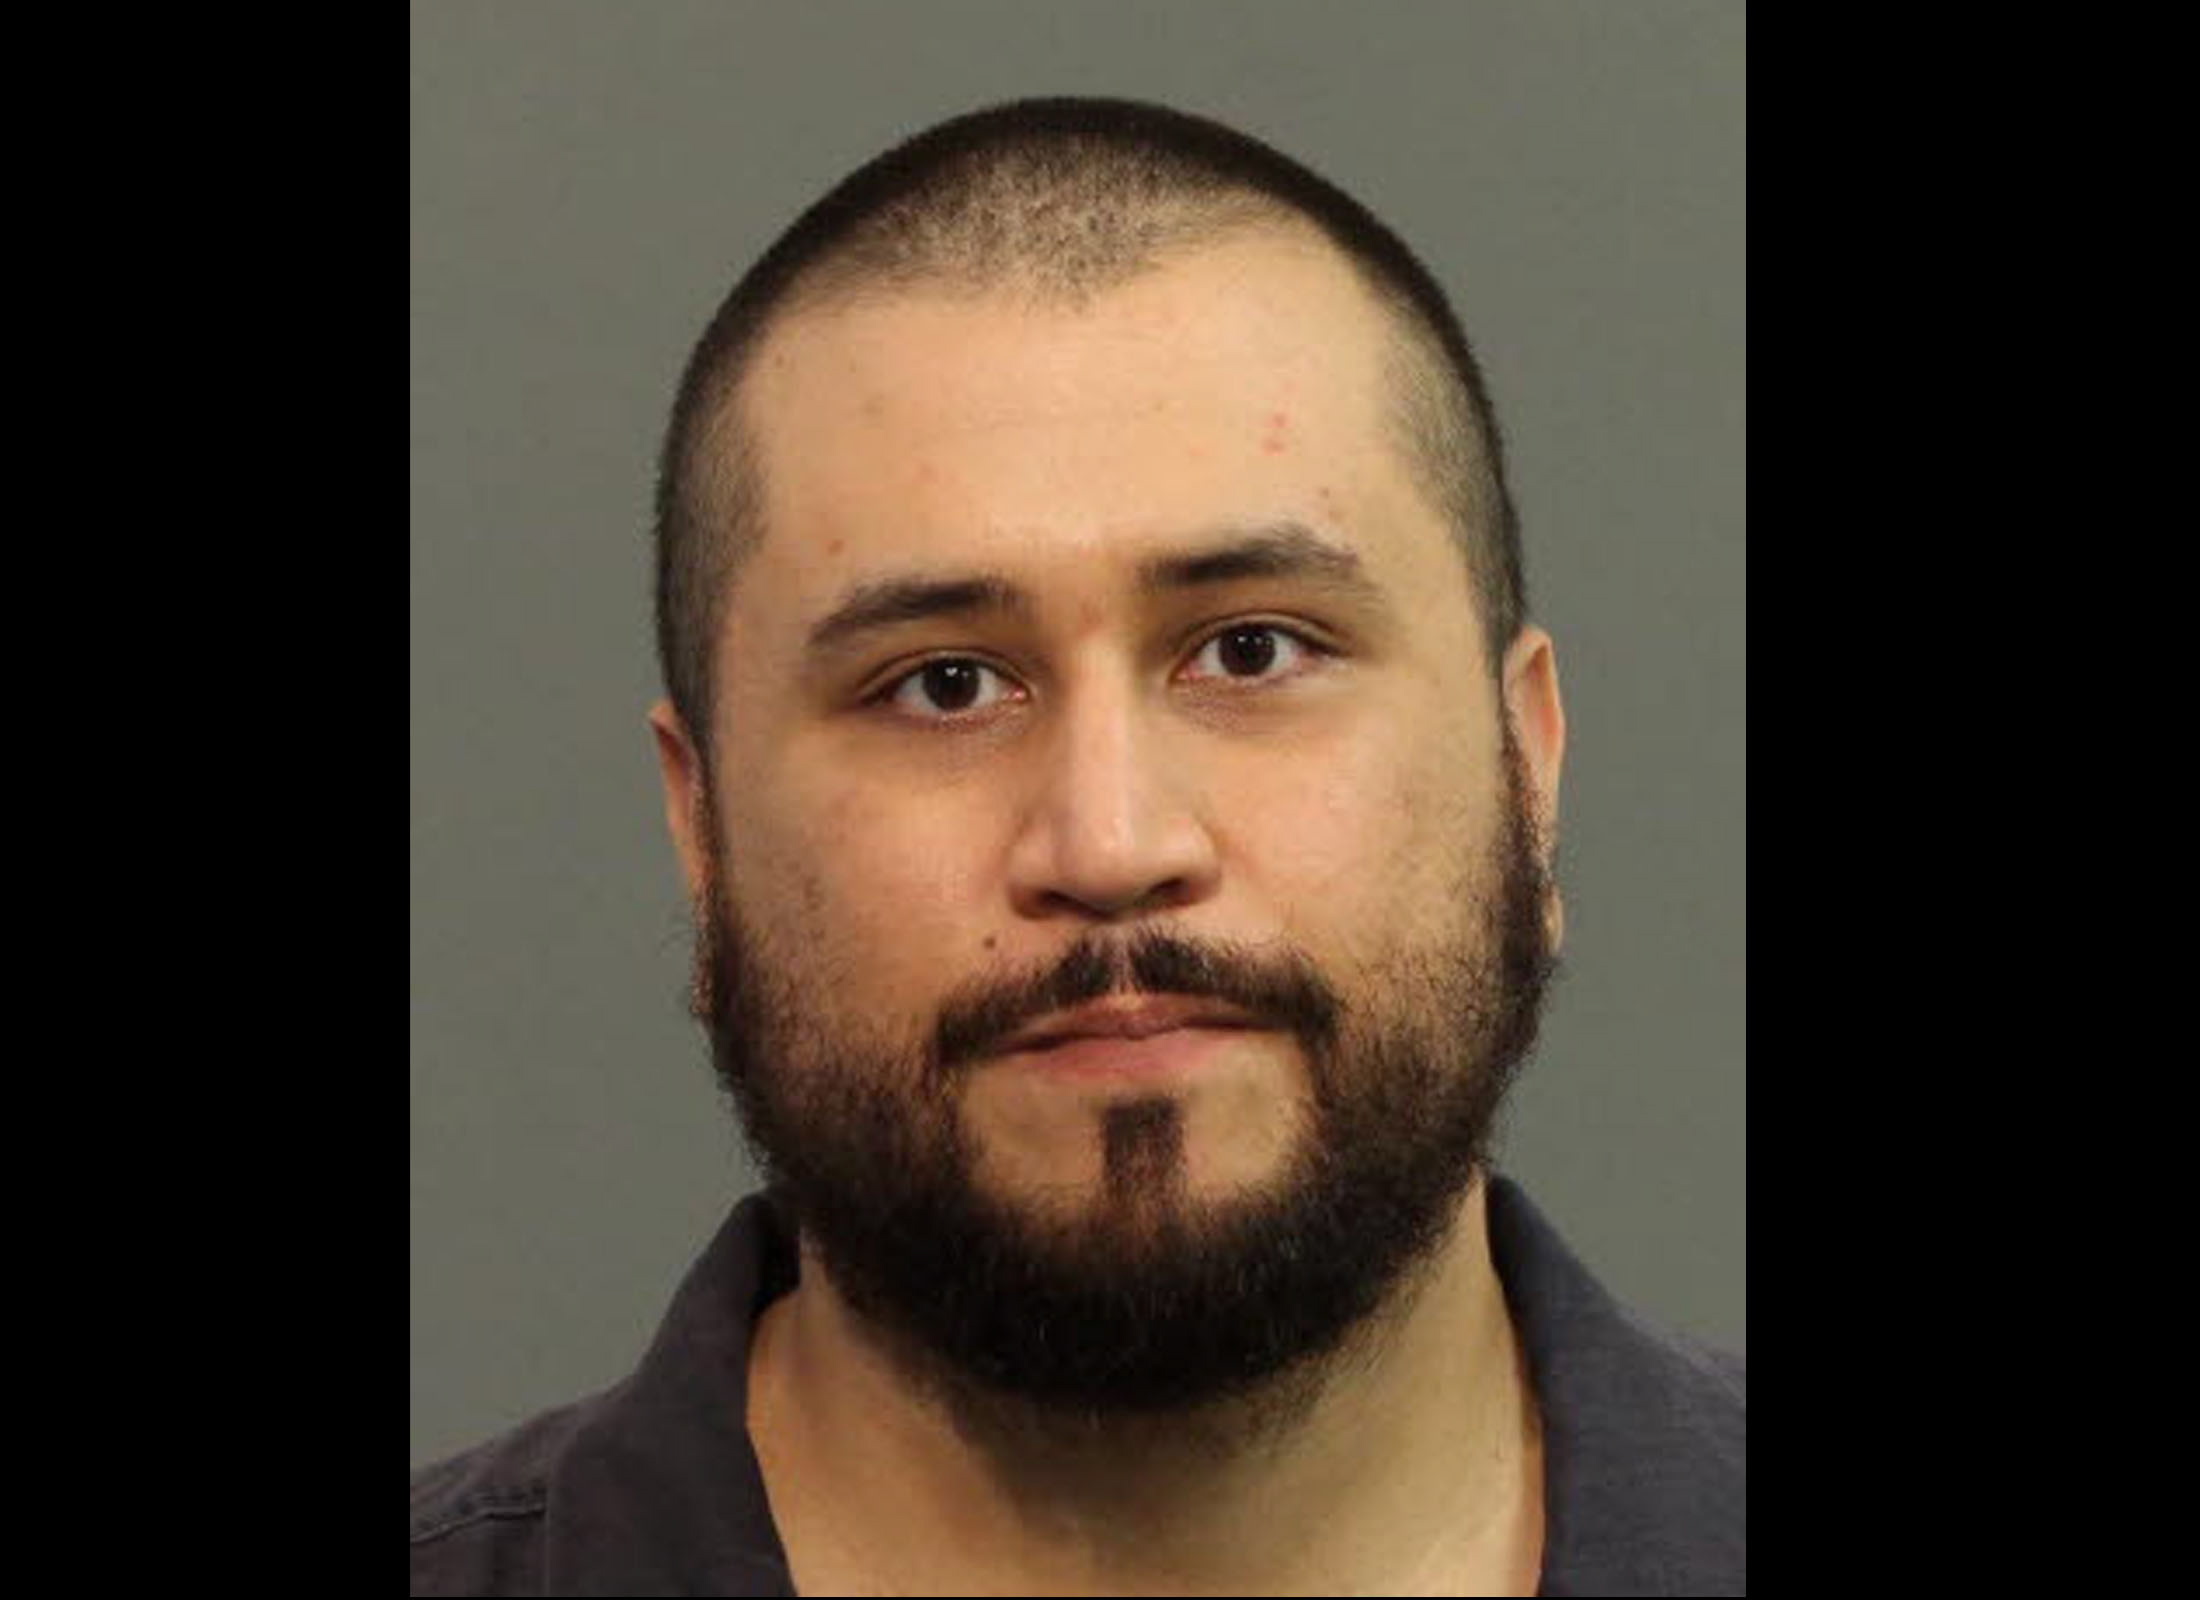 This image provided by the Seminole County Sheriff's Office shows former neighborhood watch volunteer George Zimmerman after he was arrested Monday in Apopka, Fla.